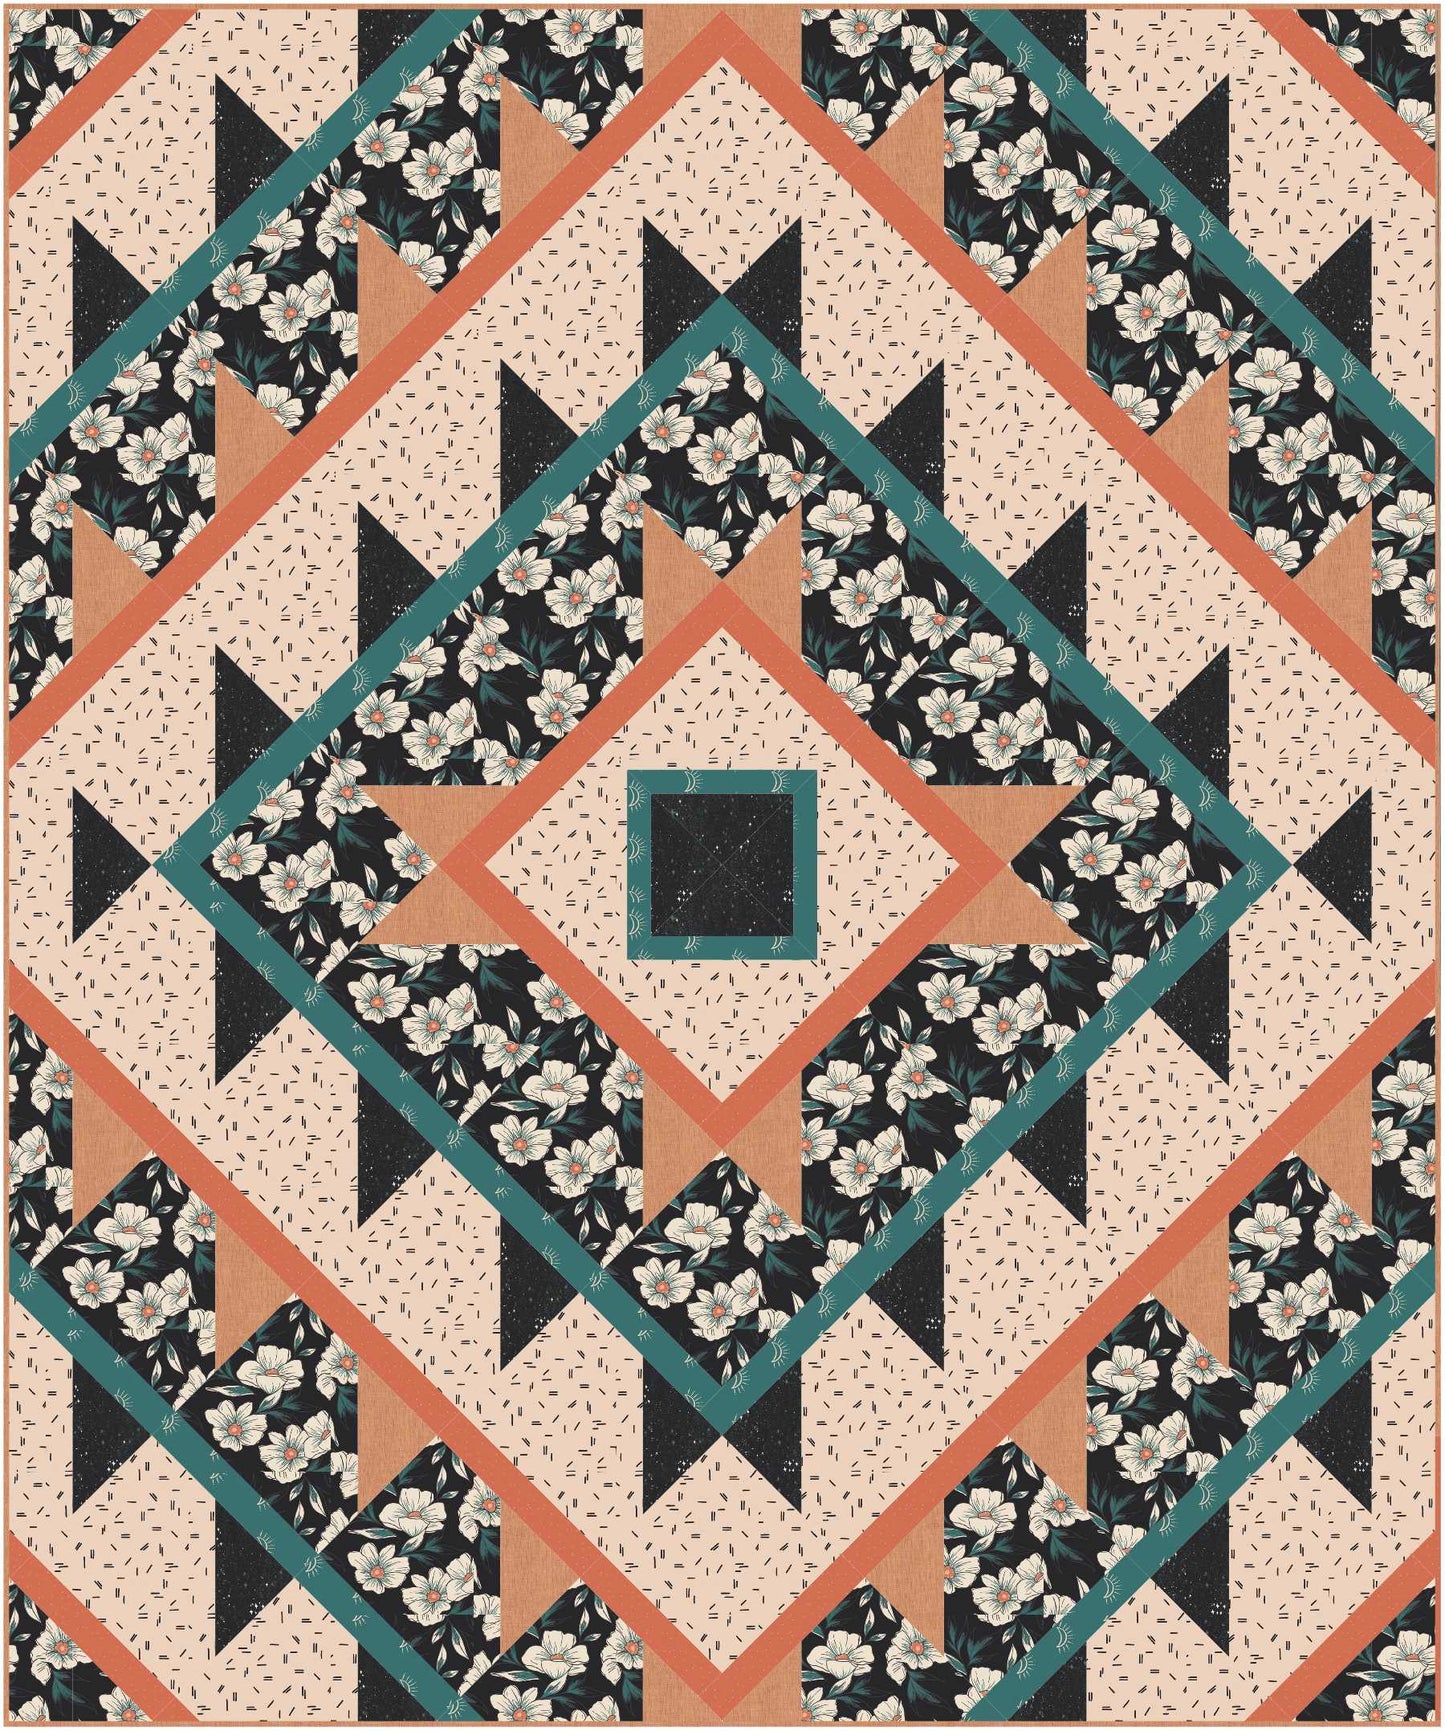 Green Lake Quilt Pattern - Julia Wachs Designs - A digital mock-up of the Green Lake cover quilt.